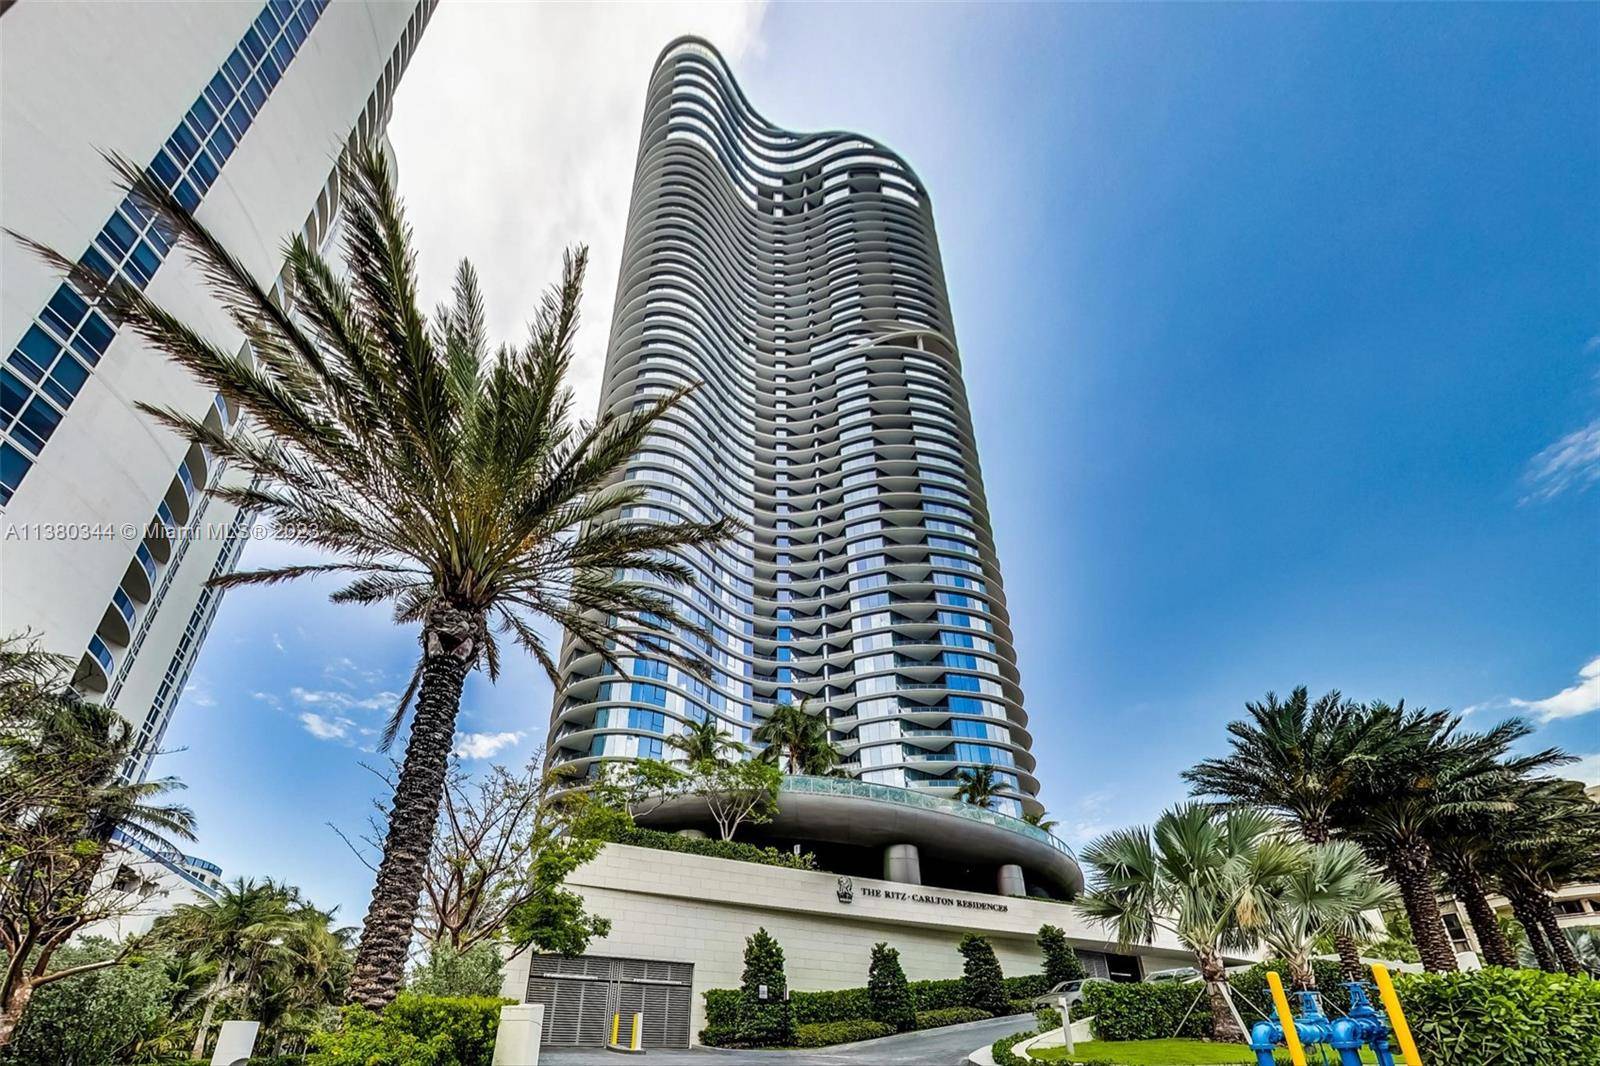 The 5 Star Ritz Carlton Residences in Sunny Isles, Fl brings you this 3 4.